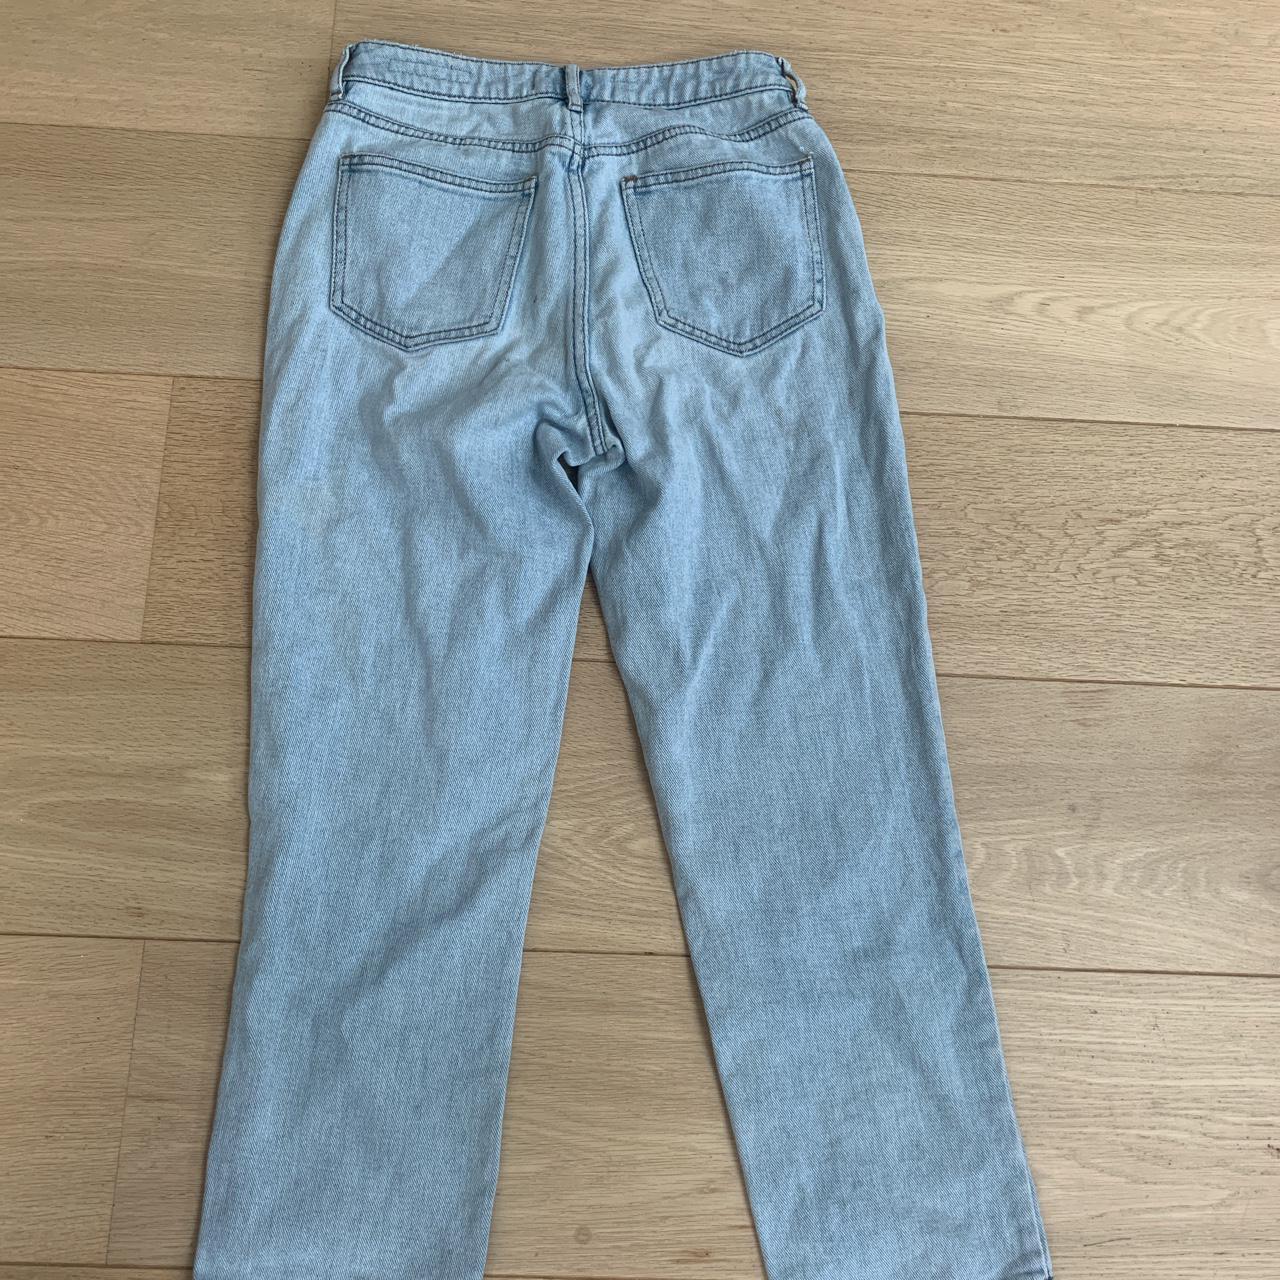 Product Image 4 - Girls Mom jeans W25 fits